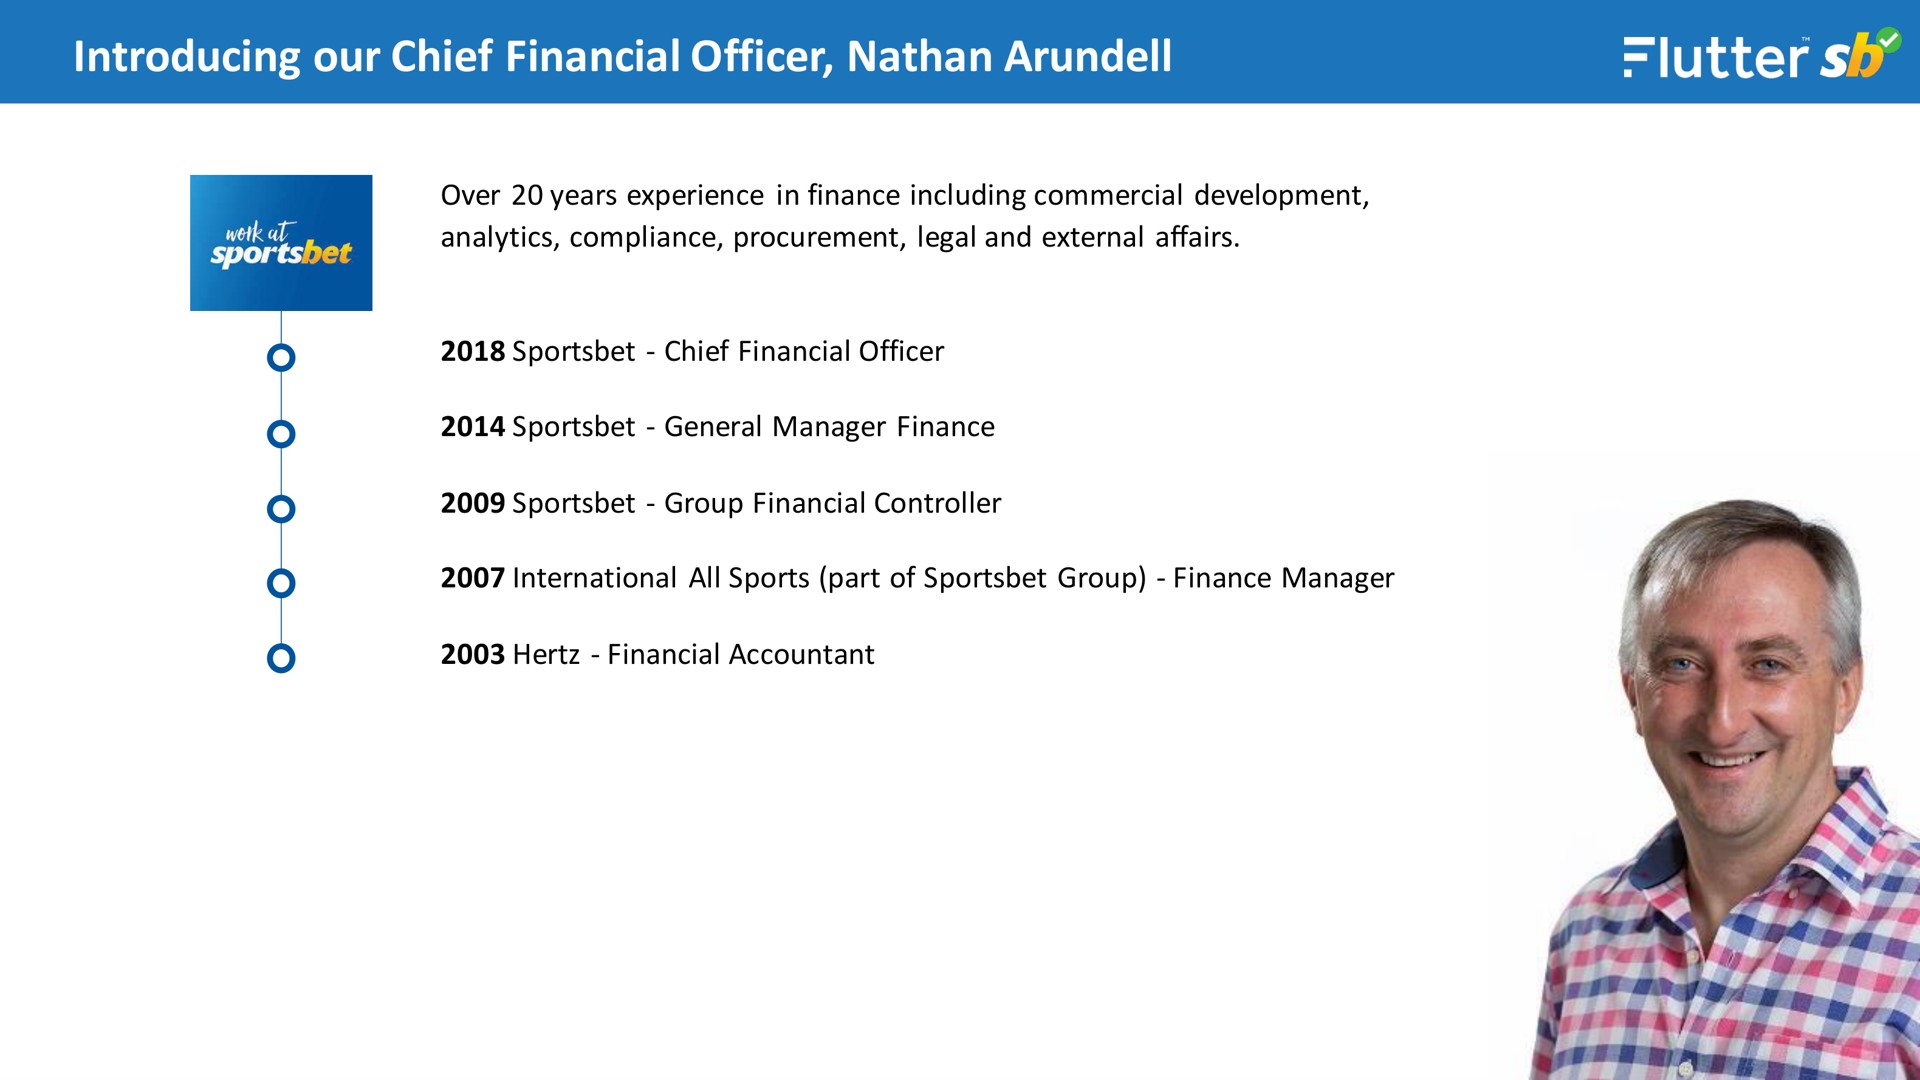 introducing our chief financial officer | Flutter